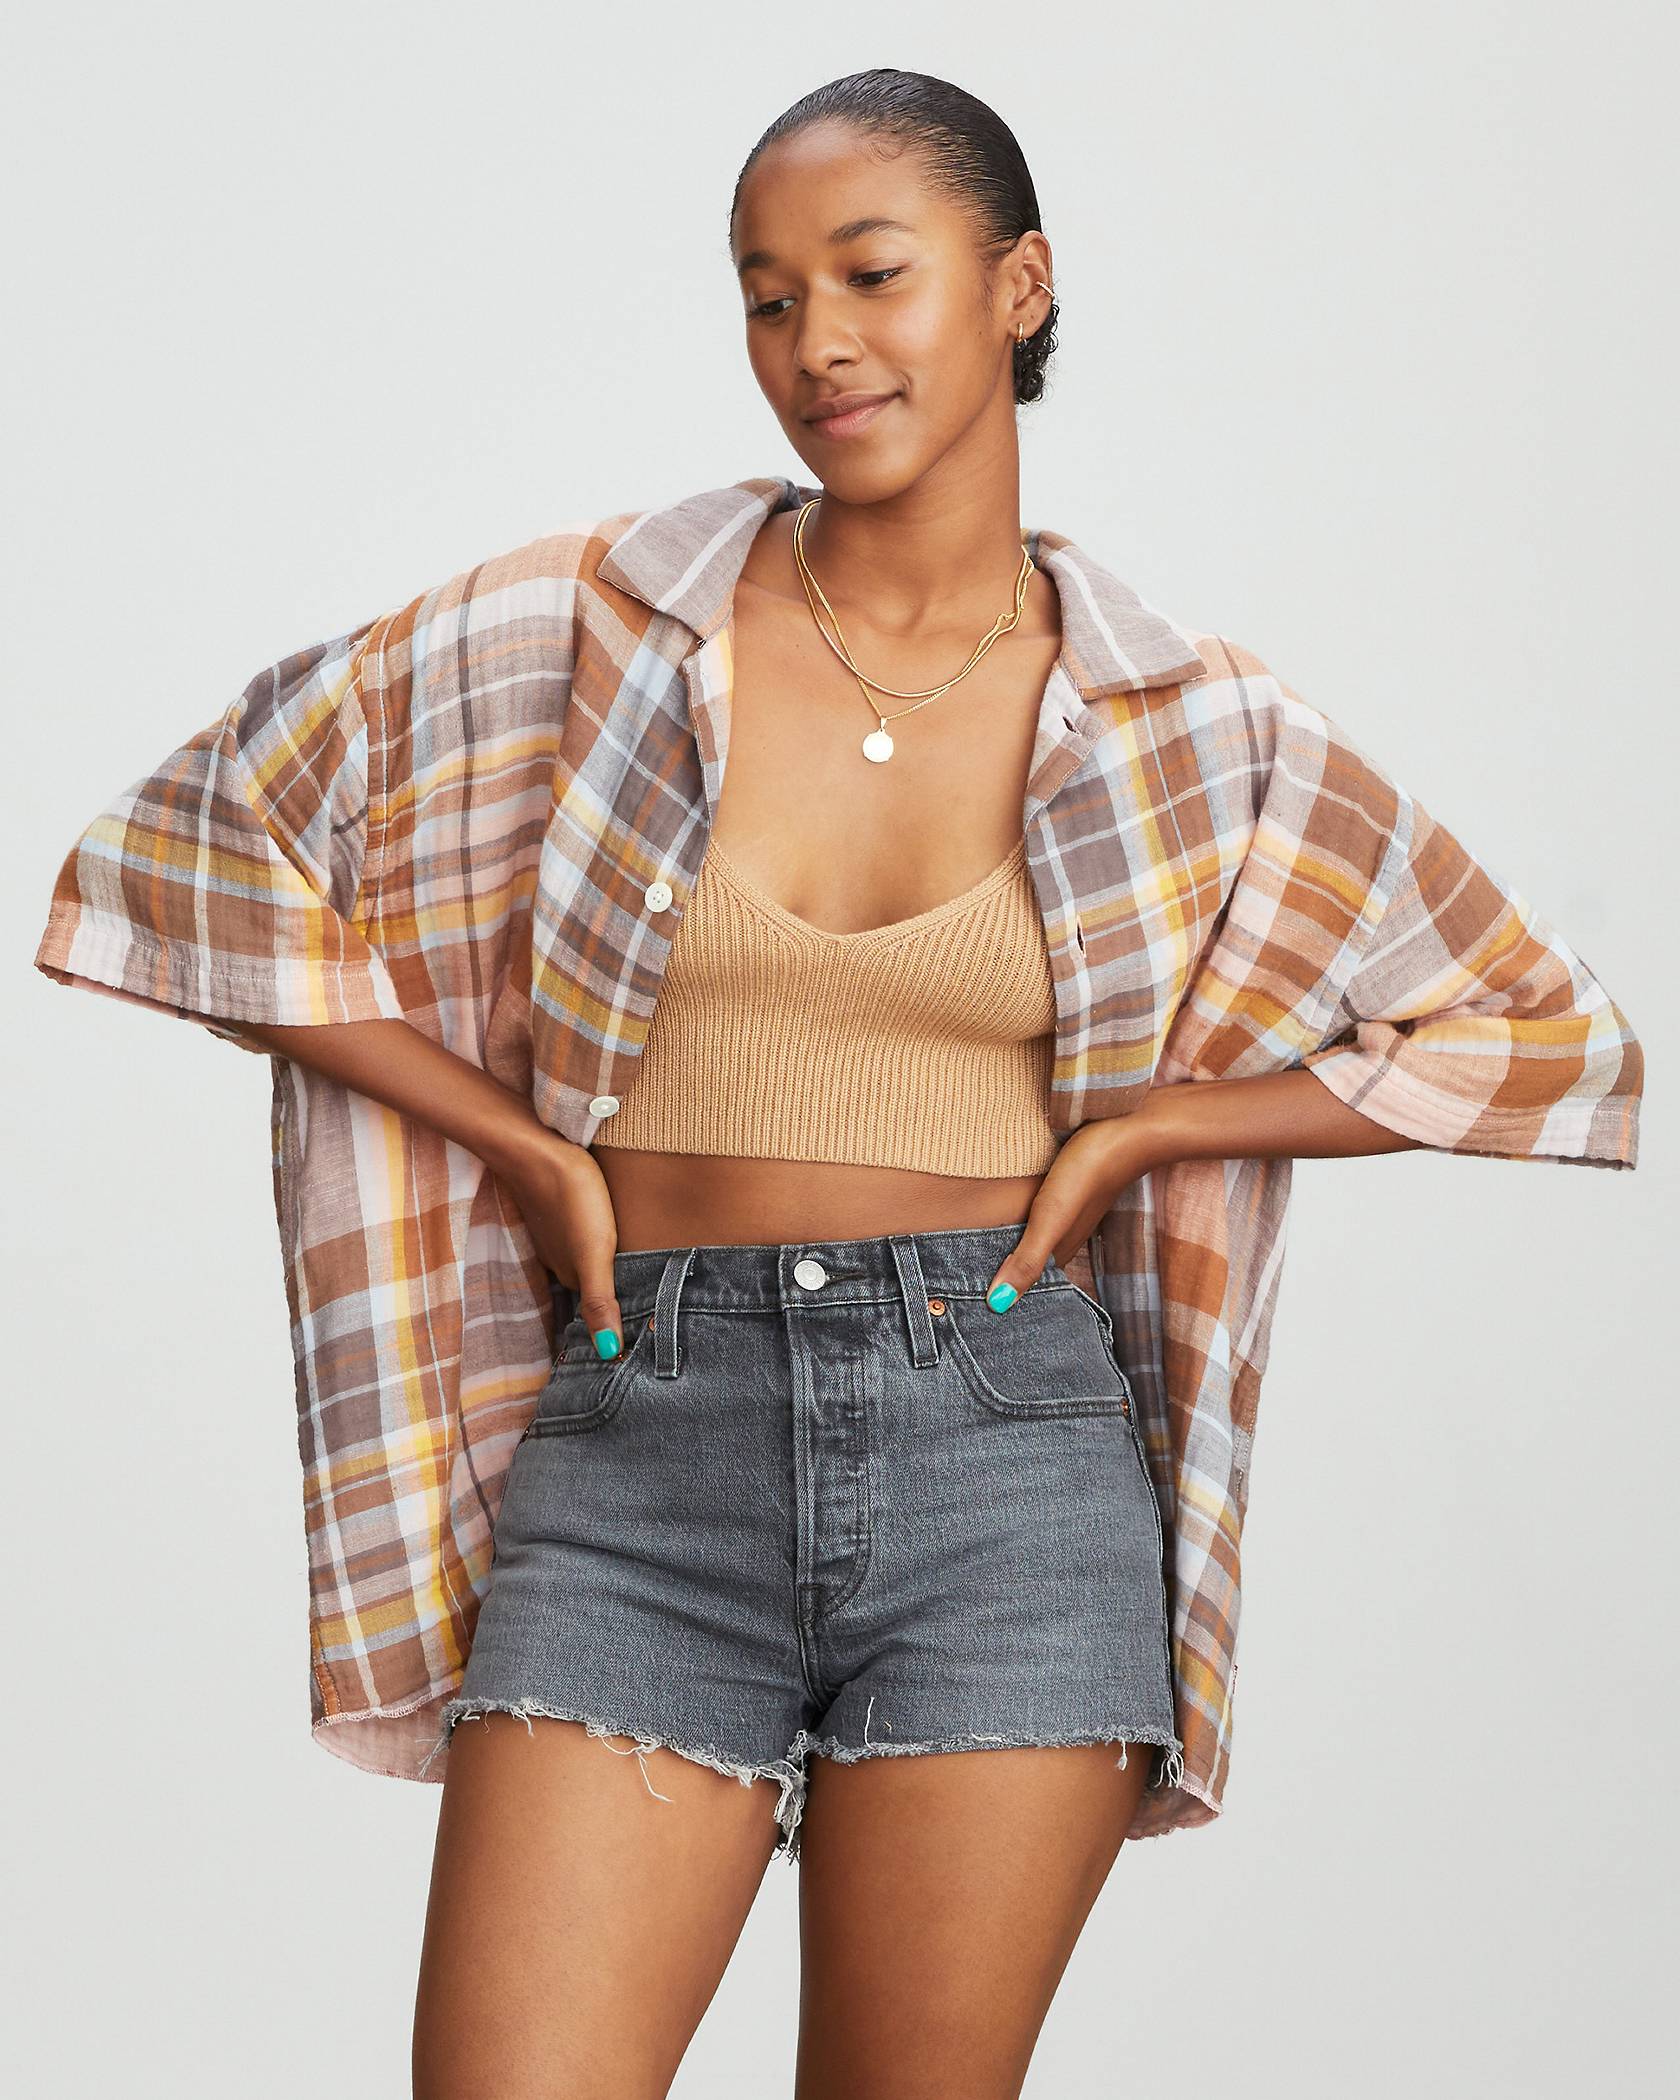 Levi's 501 Shorts: Which Women's Cutoffs Win? - The Mom Edit